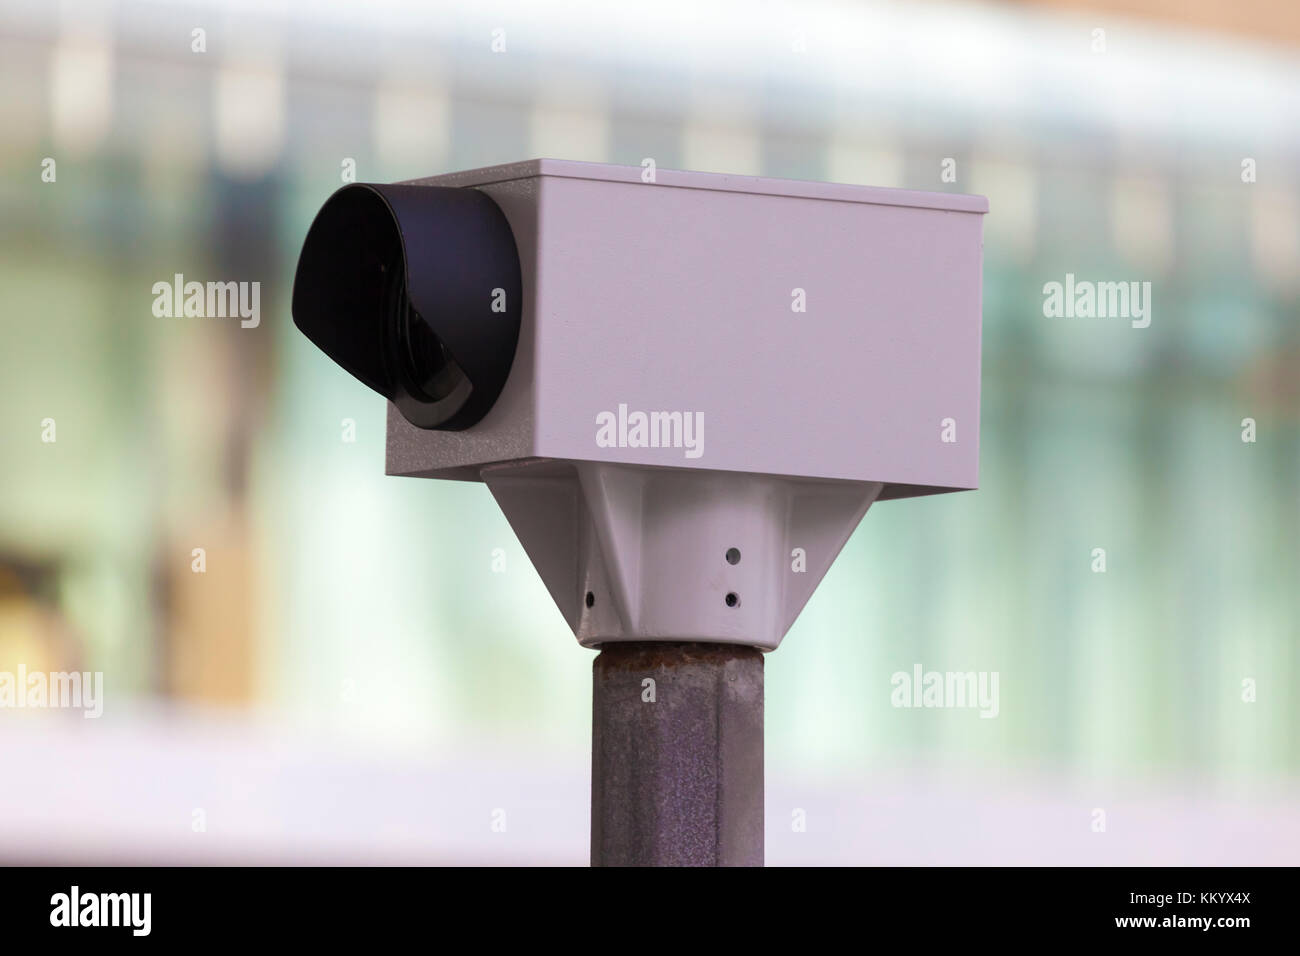 Speed camera on a street in the city Stock Photo